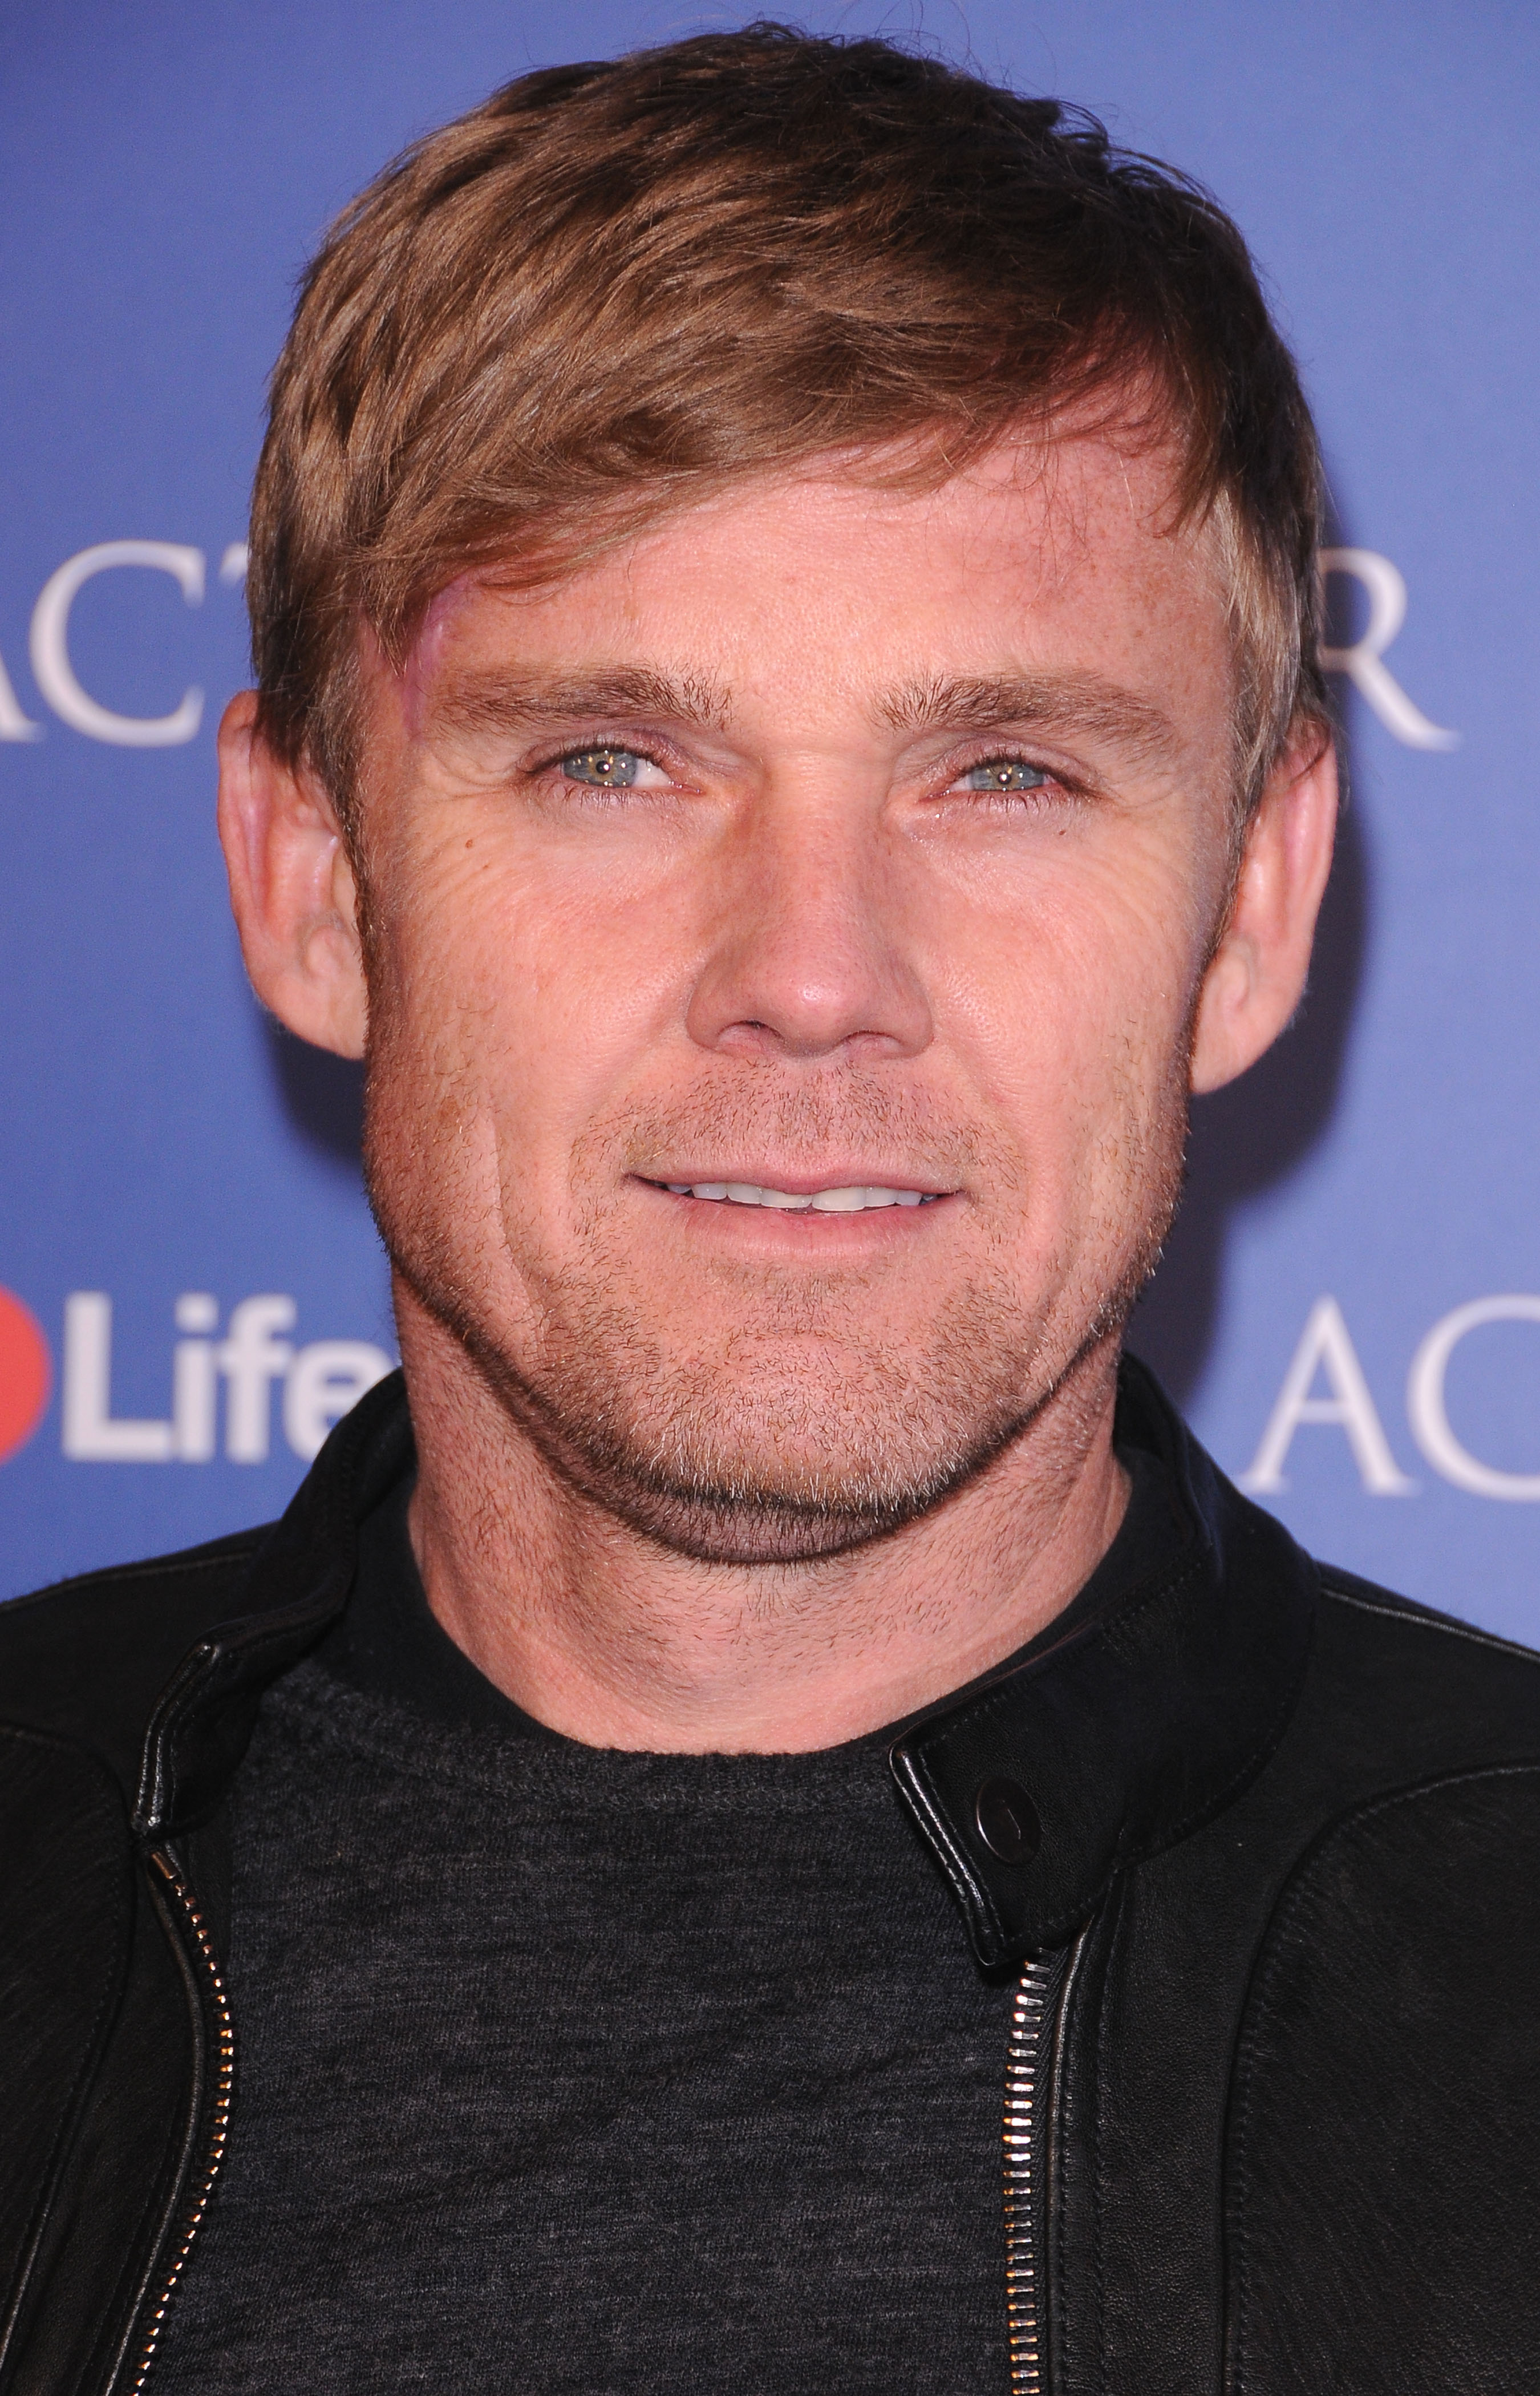 More Pictures Of Ricky Schroder. ricky schroder images. 